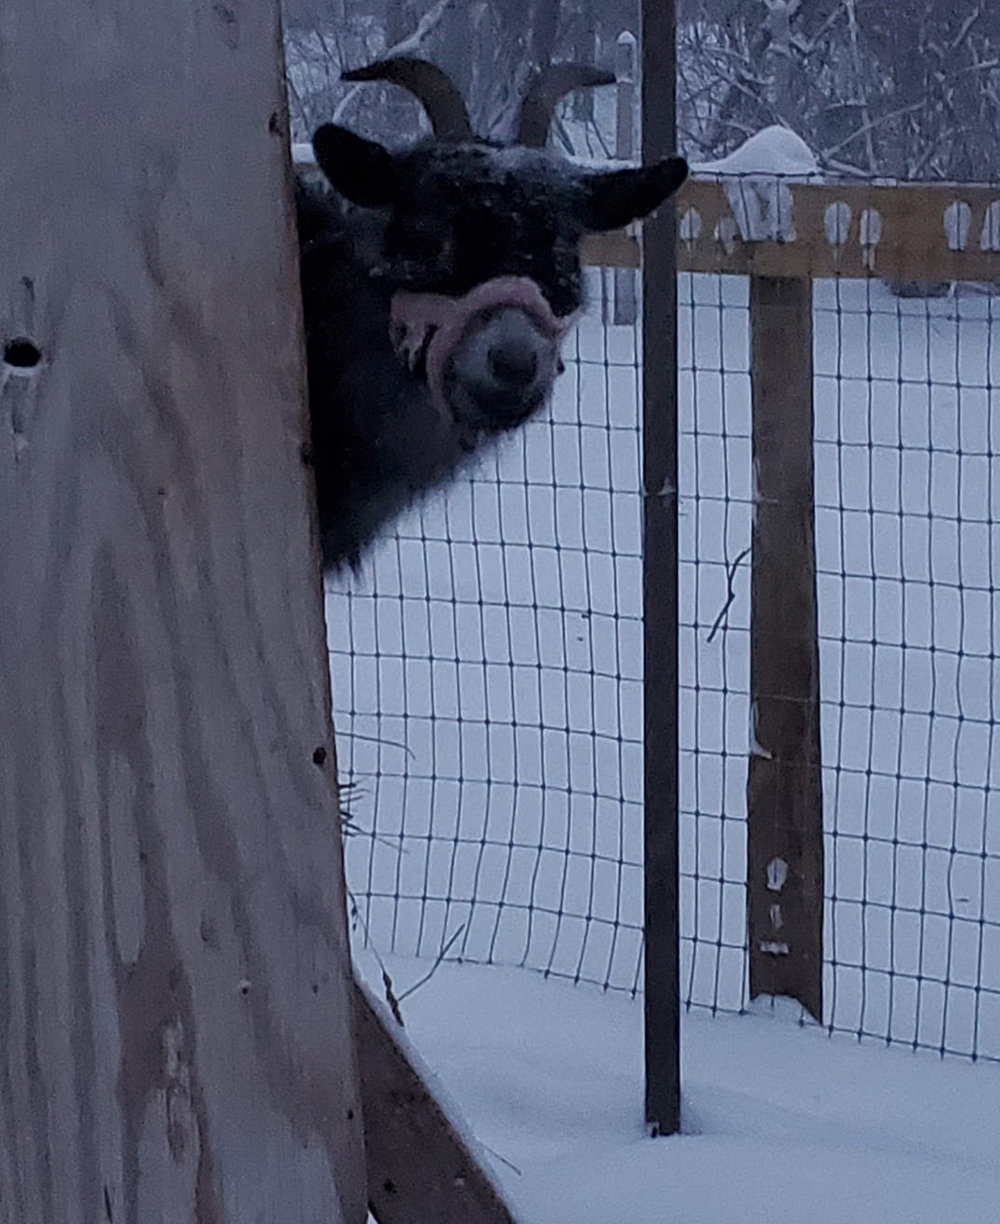 Goat checking out the snow.